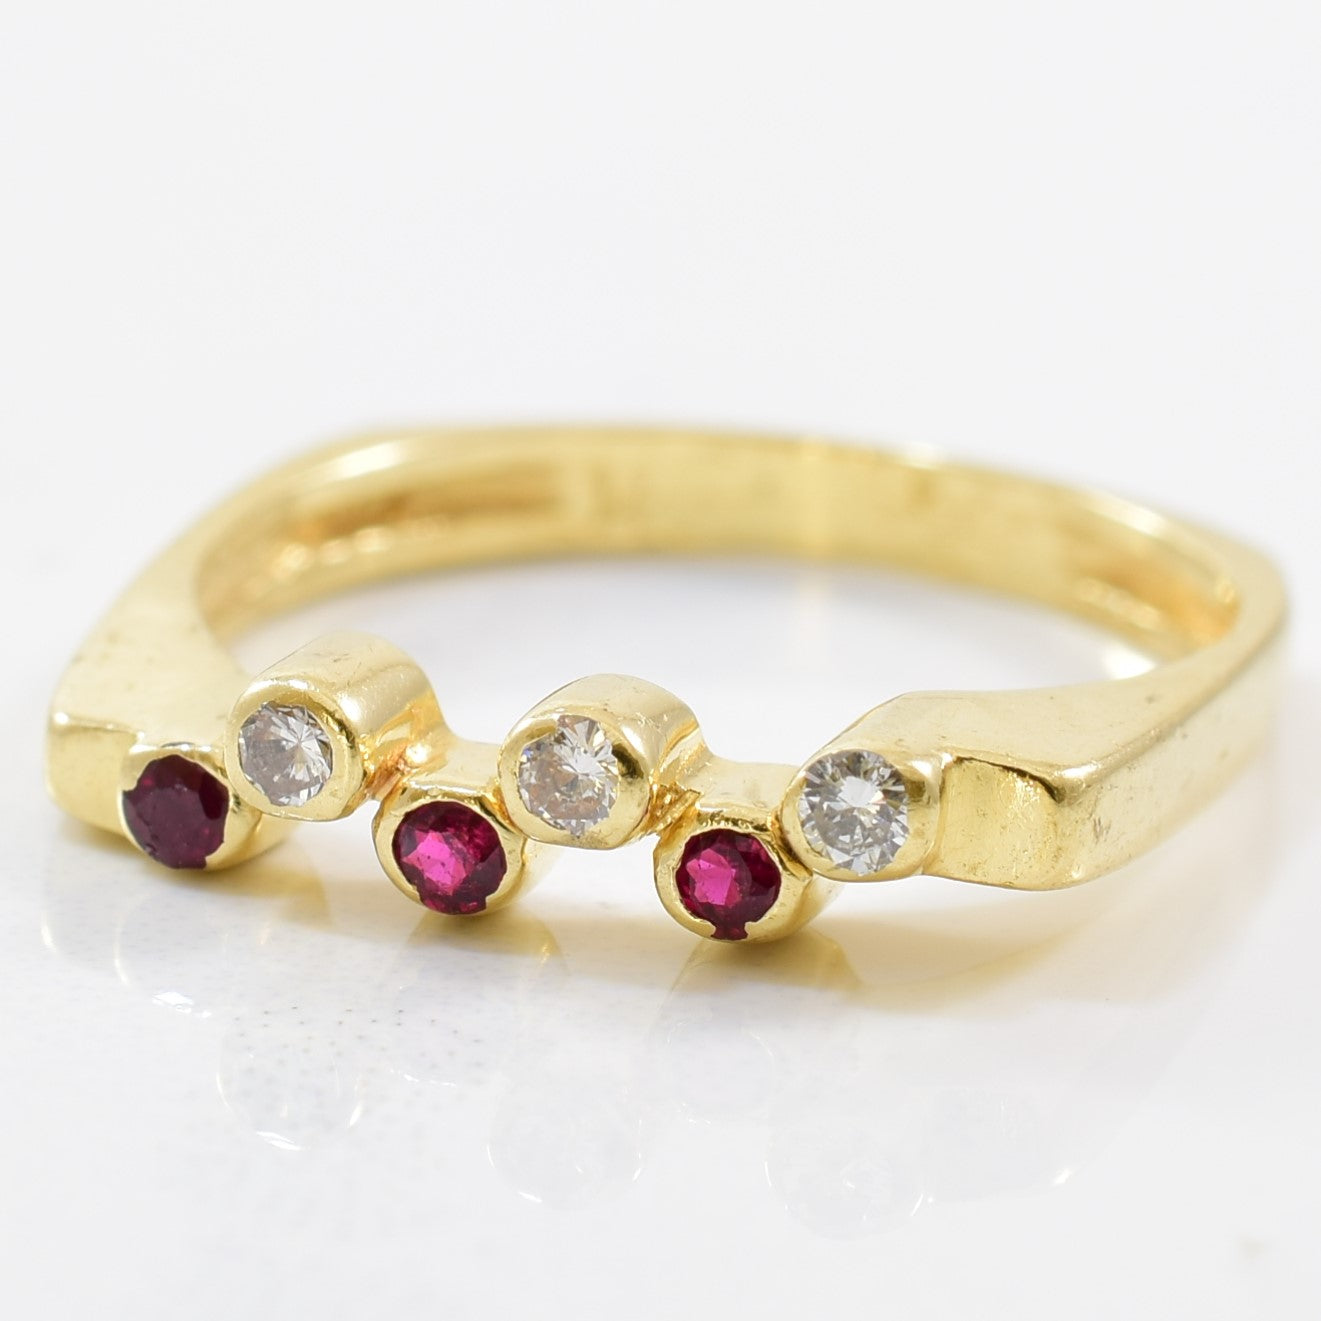 Staggered Ruby & Diamond Ring | 0.08ctw, 0.11ctw | SZ 6.25 |